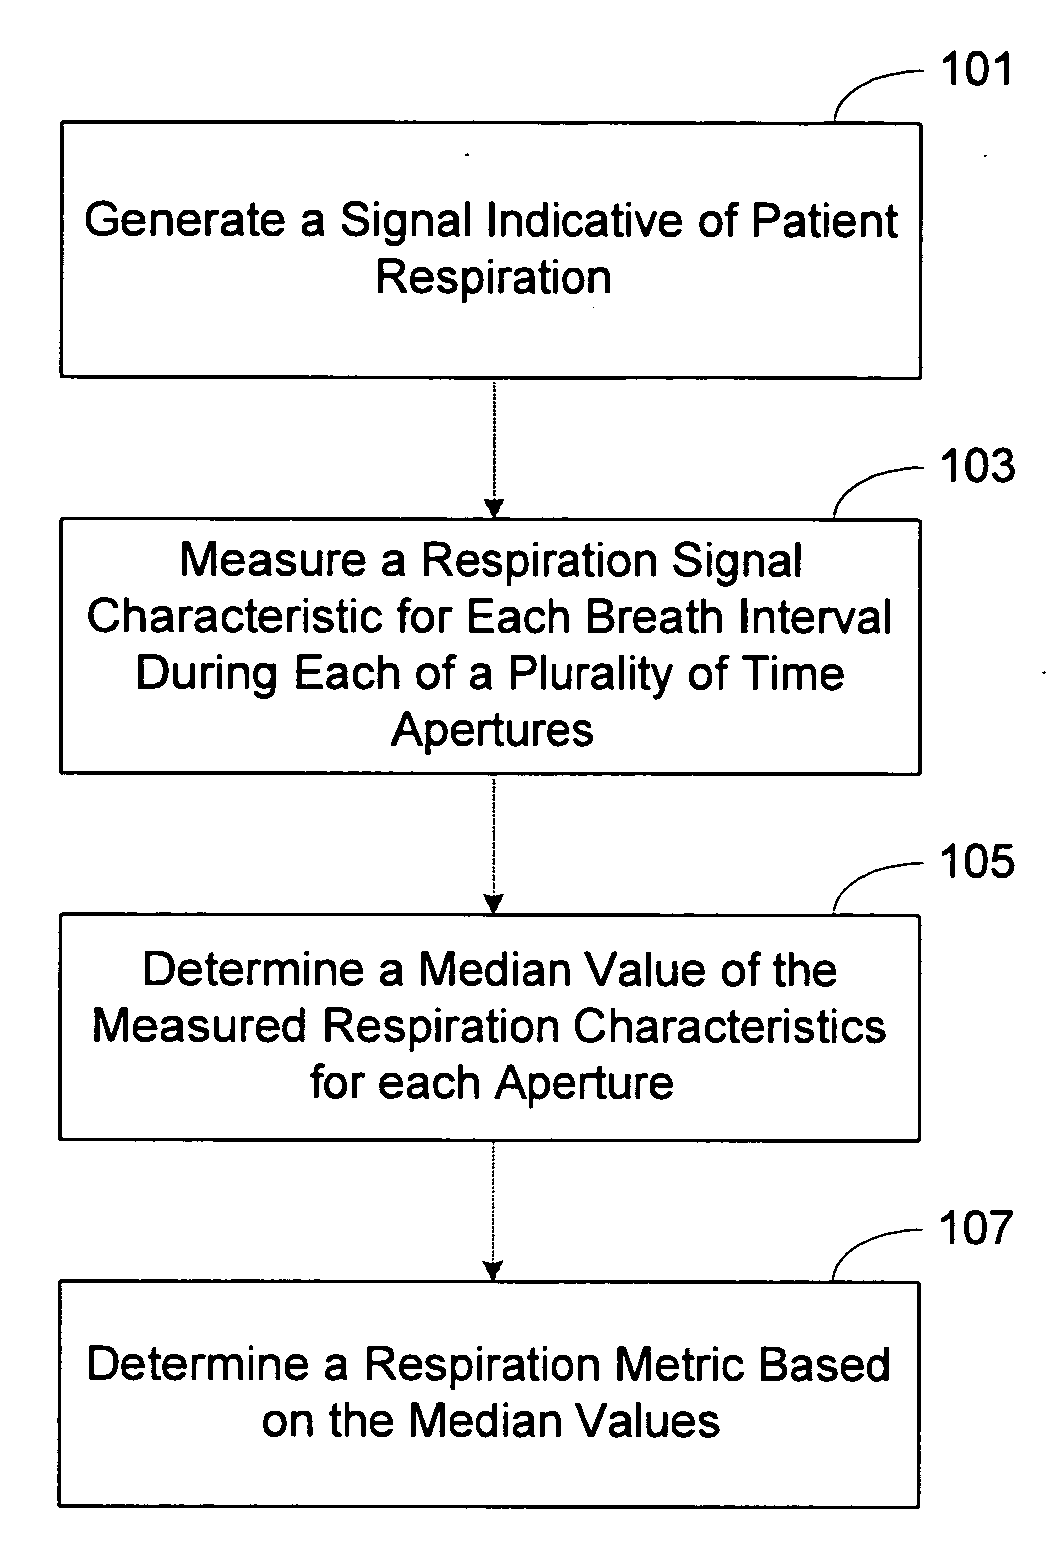 Systems and methods for determining respiration metrics